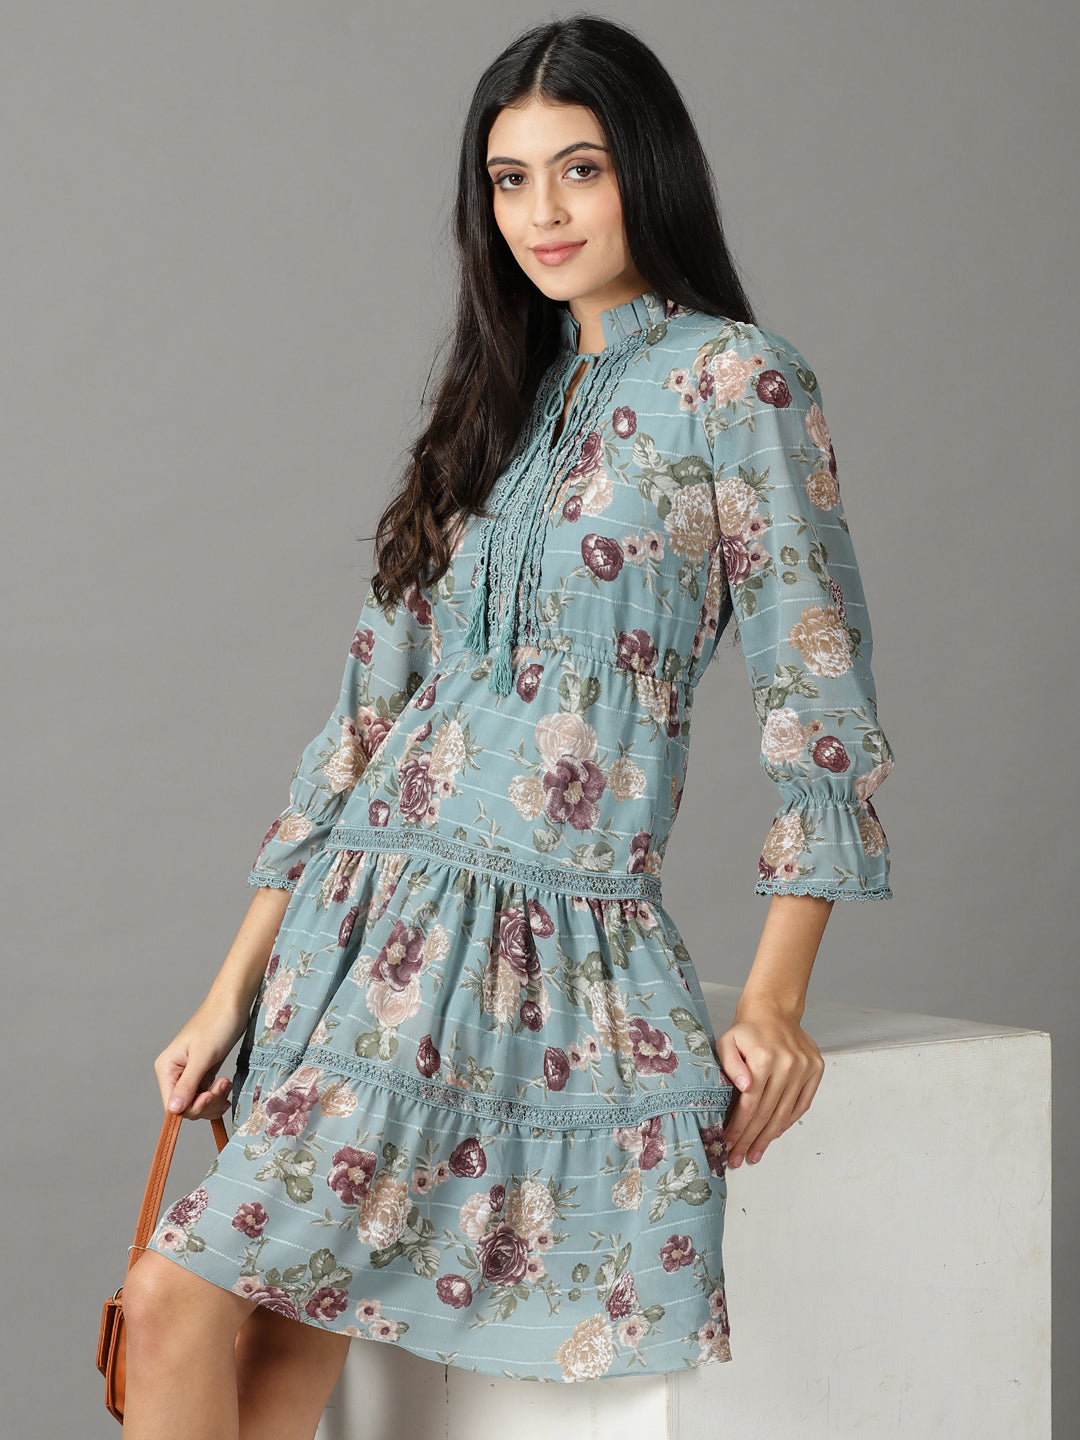 Women's Teal Printed Fit and Flare Dress